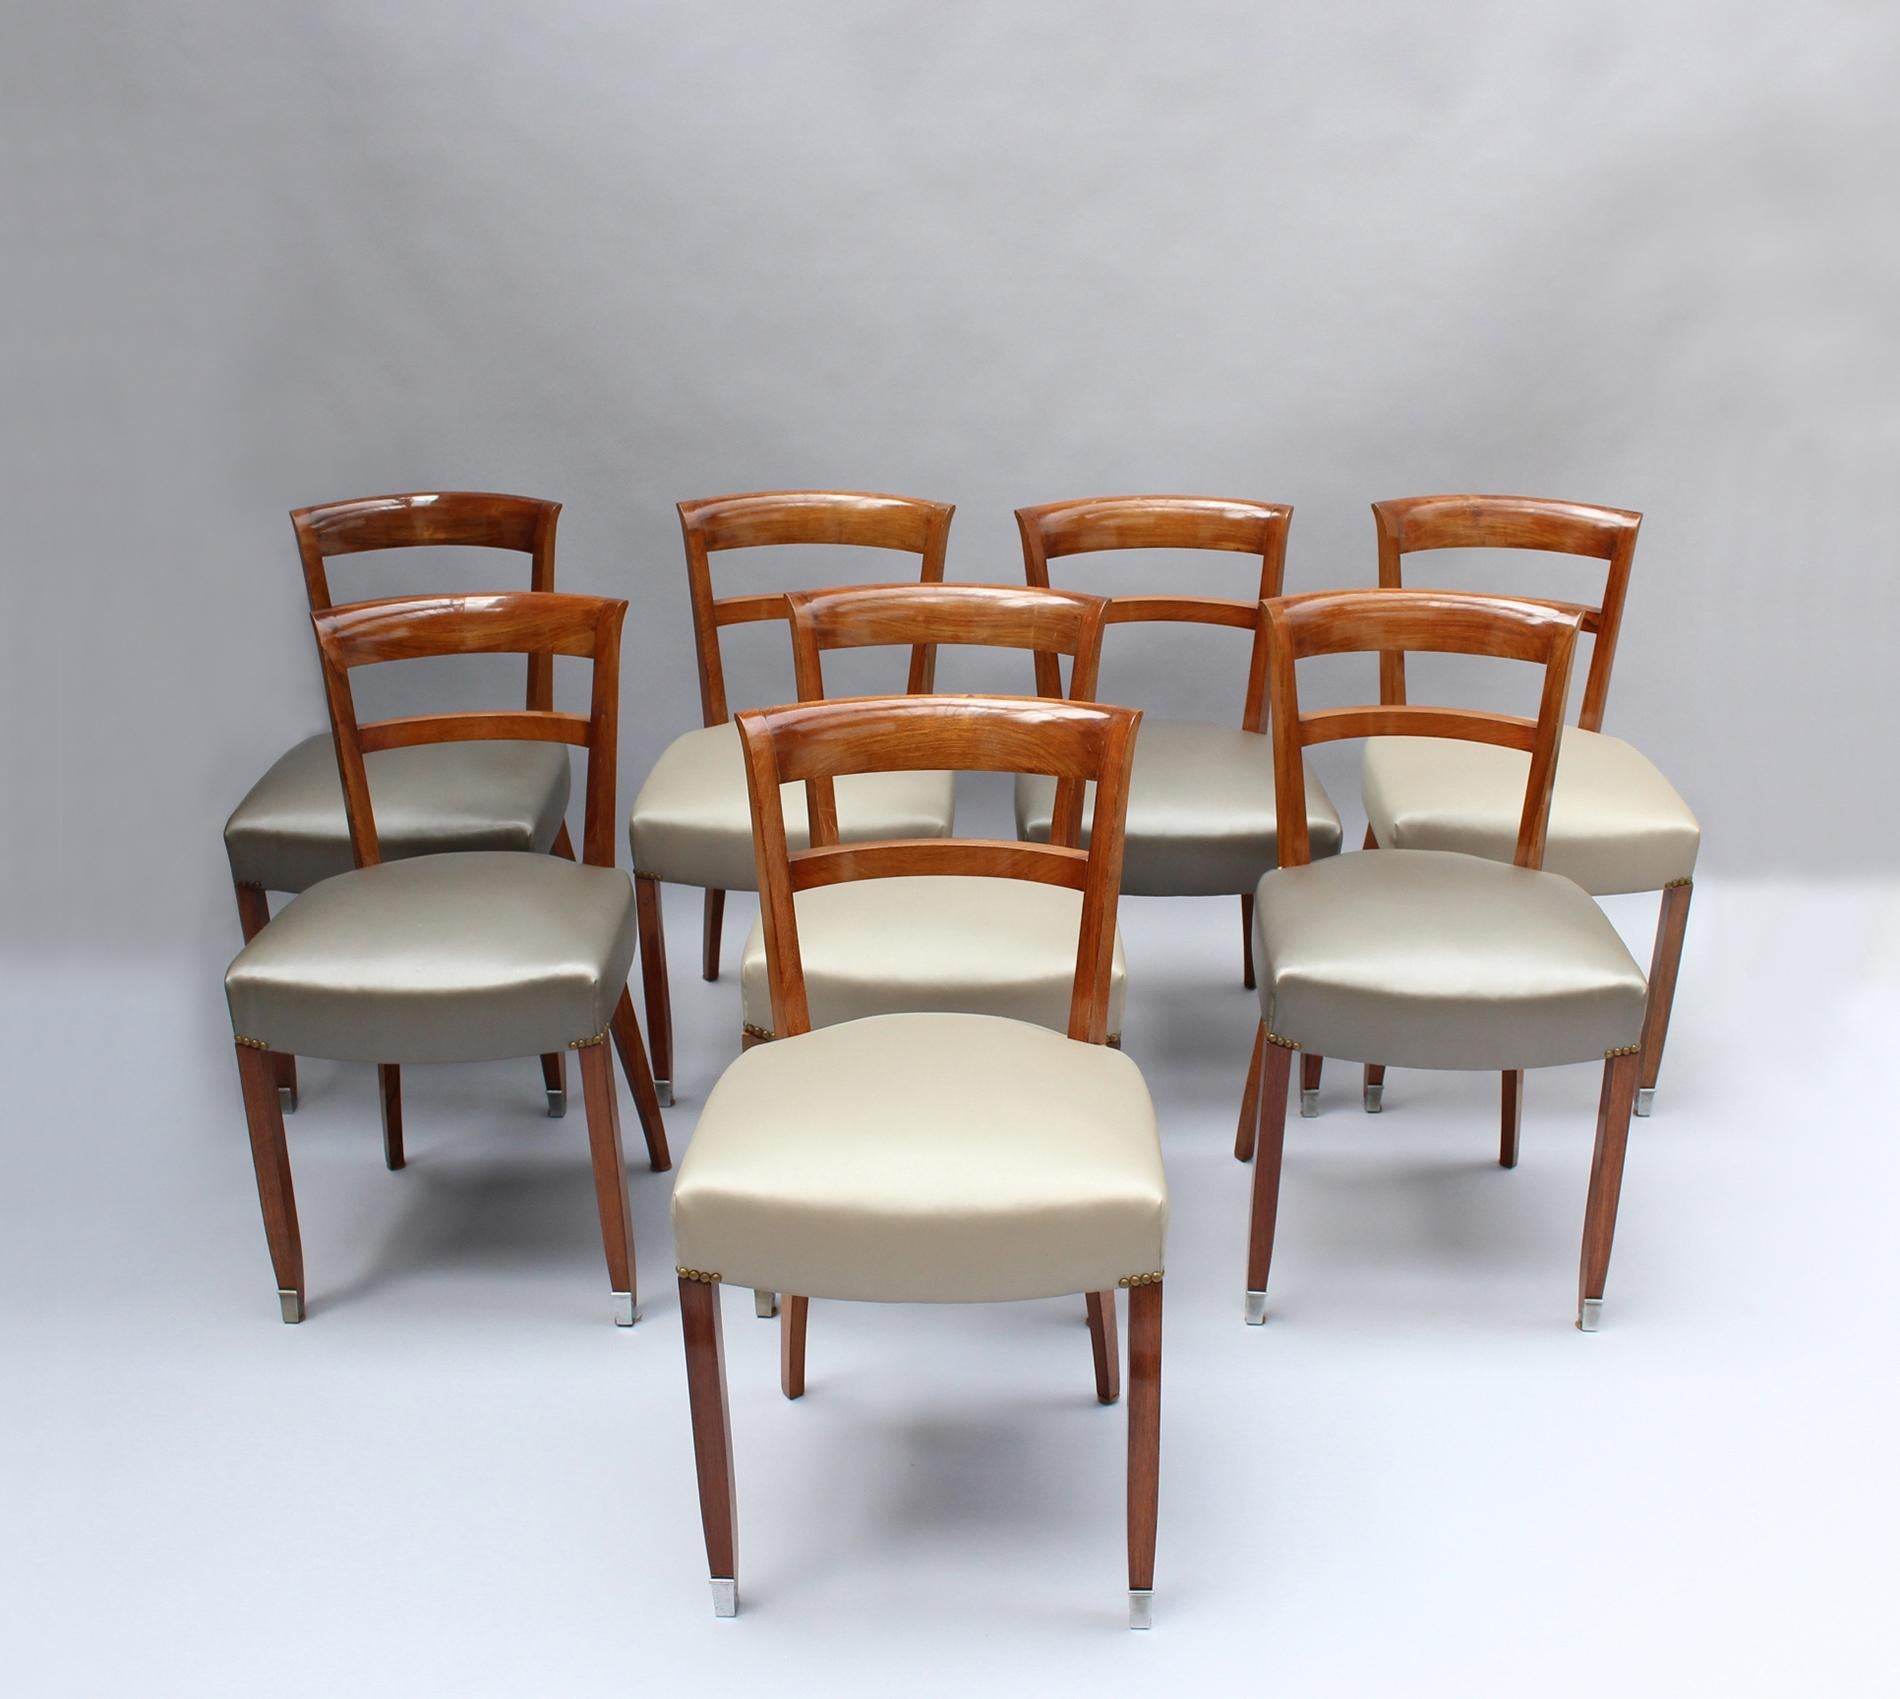 Jules Leleu - A set of eight fine French Art Deco palisander dining chairs with nickeled sabots.
Some of them are stamped.
 